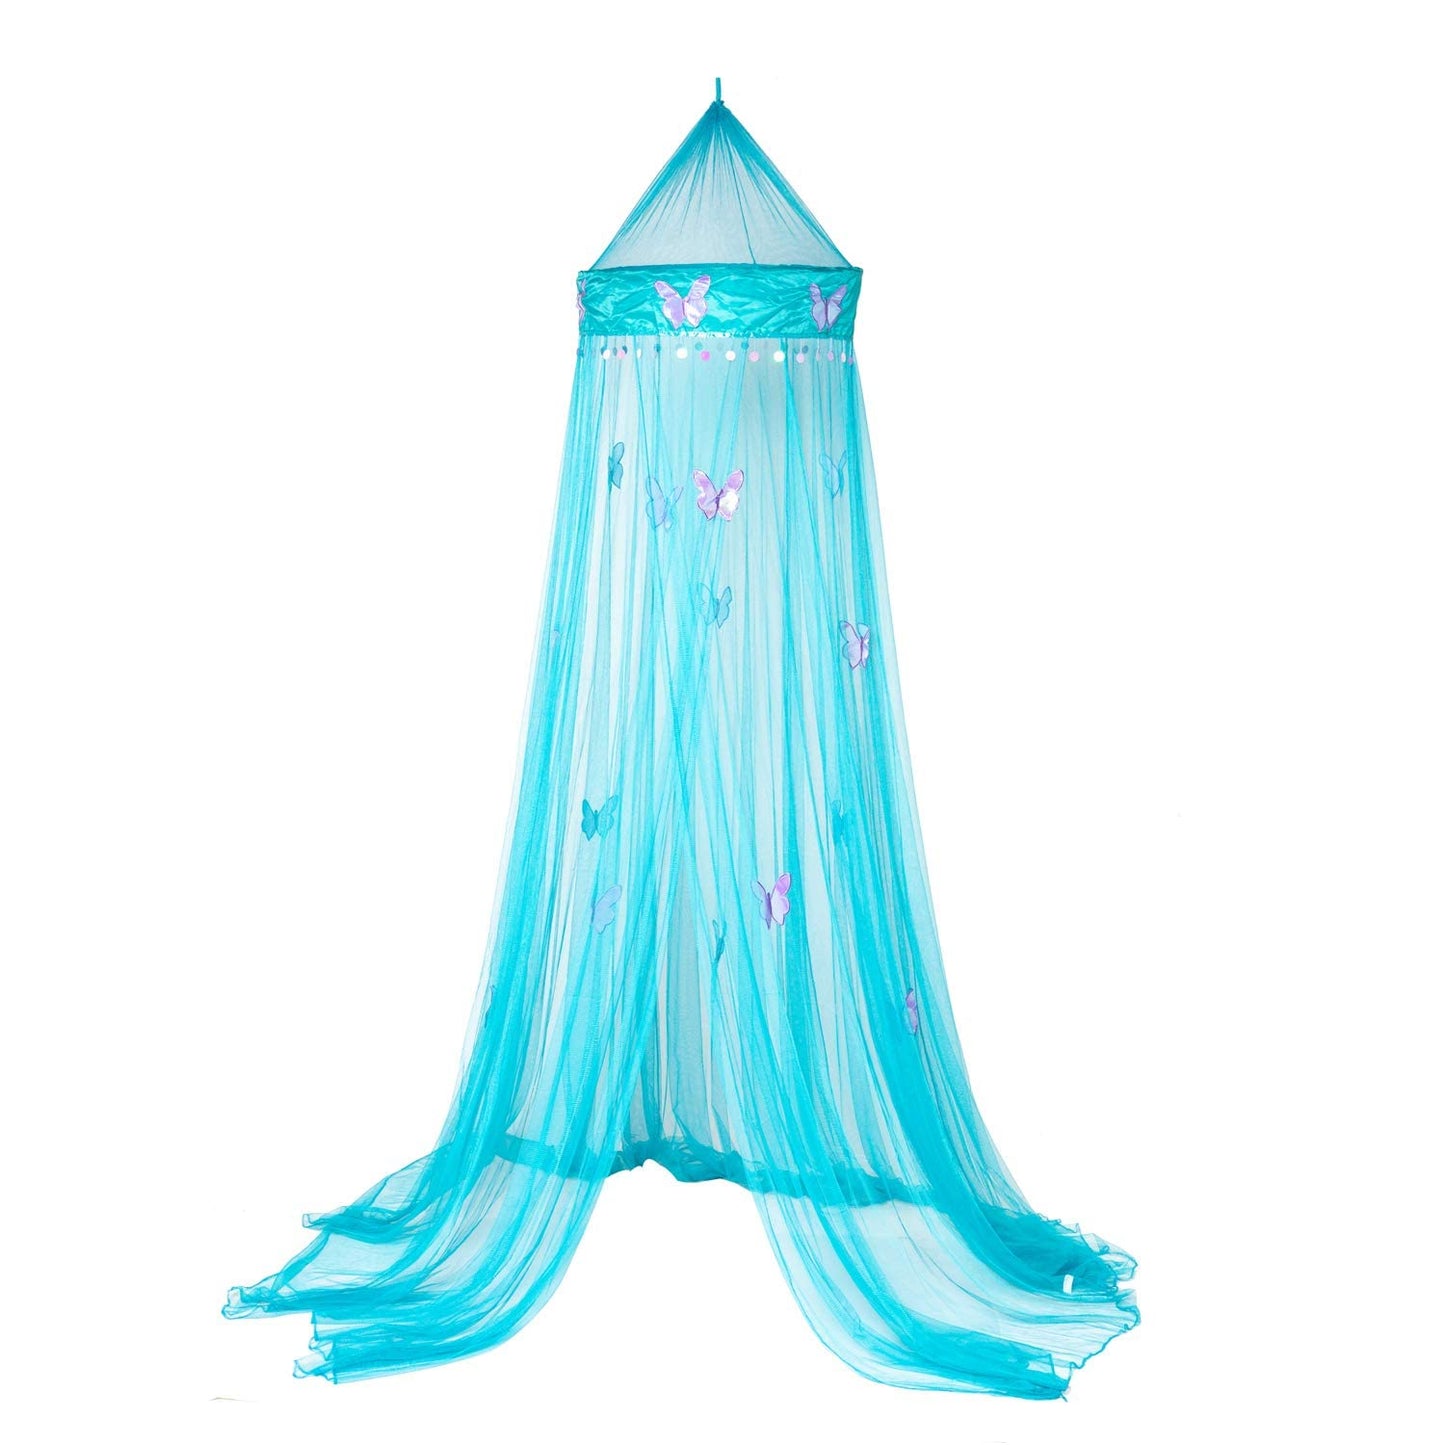 (Teal Blue) - OctoRose Butterfly Bed Canopy Mosquito NET Crib Twin Full Queen King (Teal Blue)